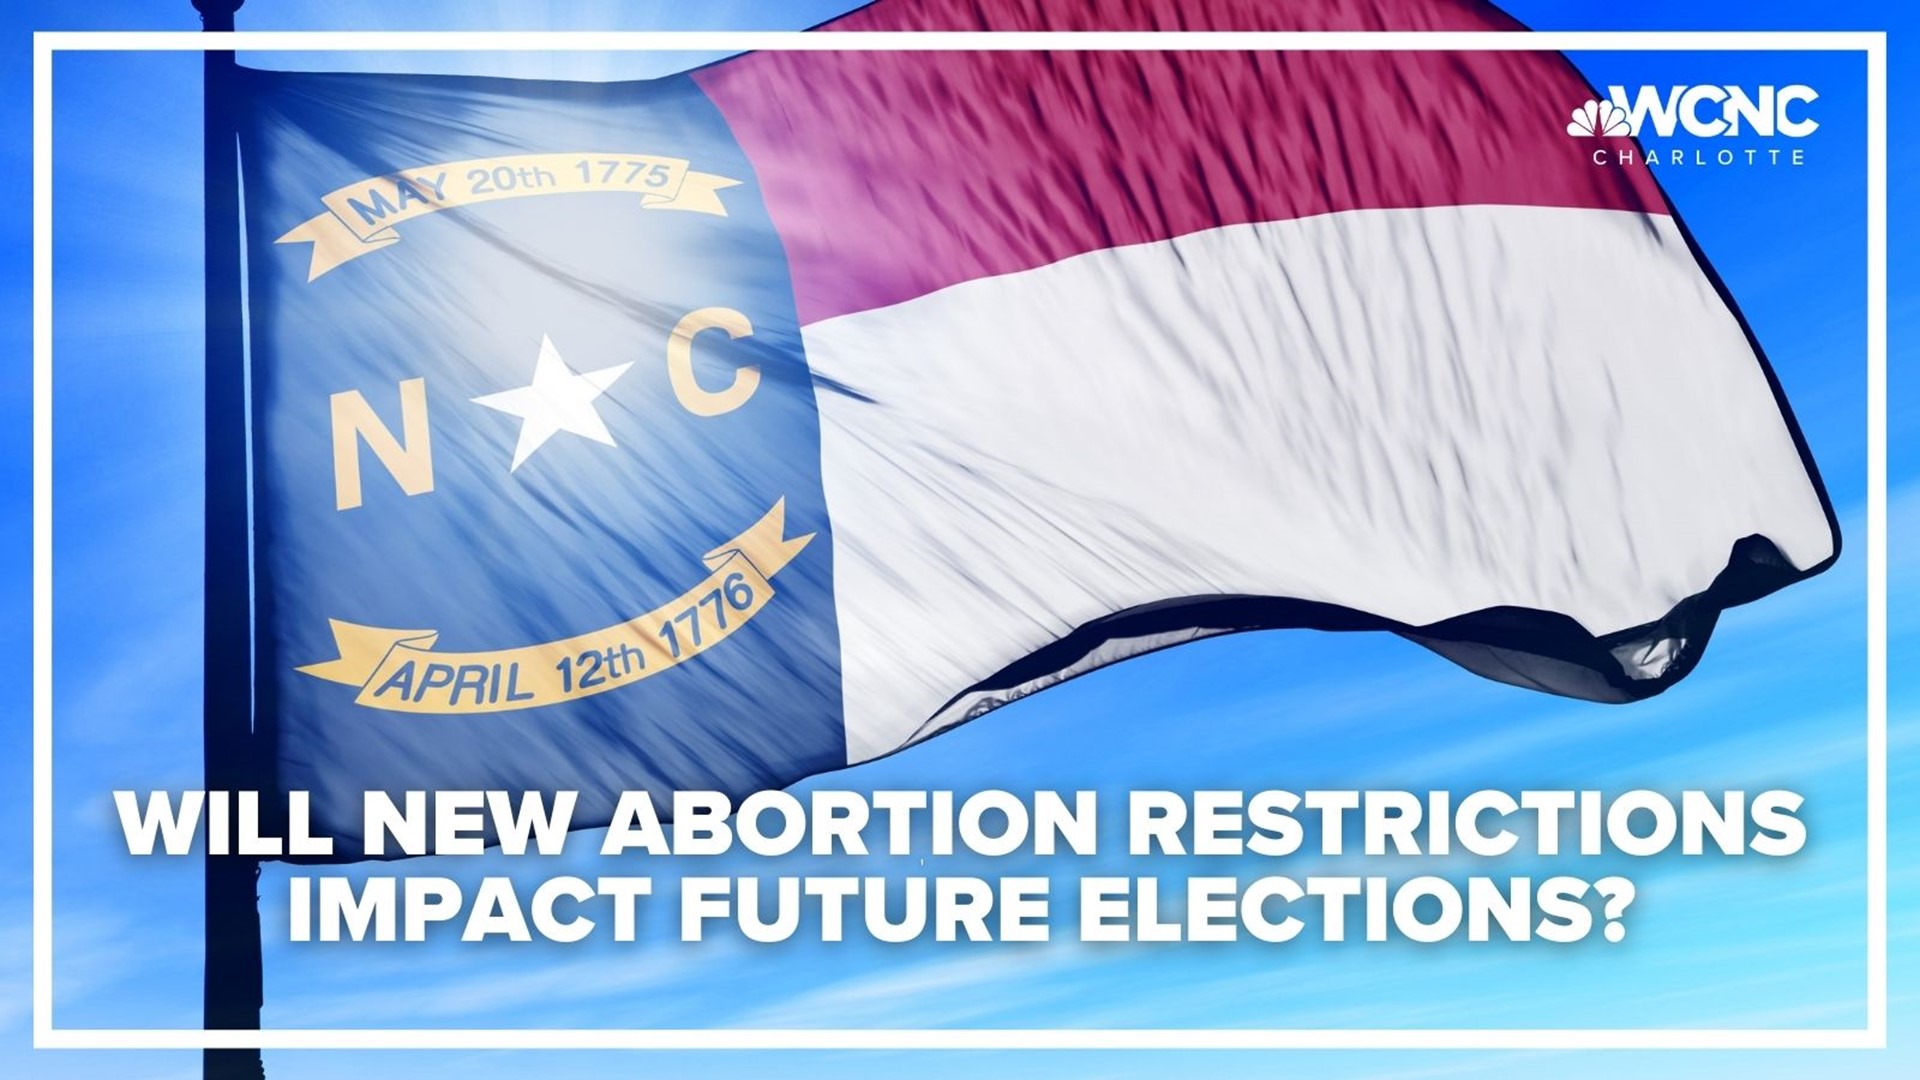 Meet the Press moderator Chuck Todd joins WCNC Charlotte to discuss the new North Carolina abortion restrictions.